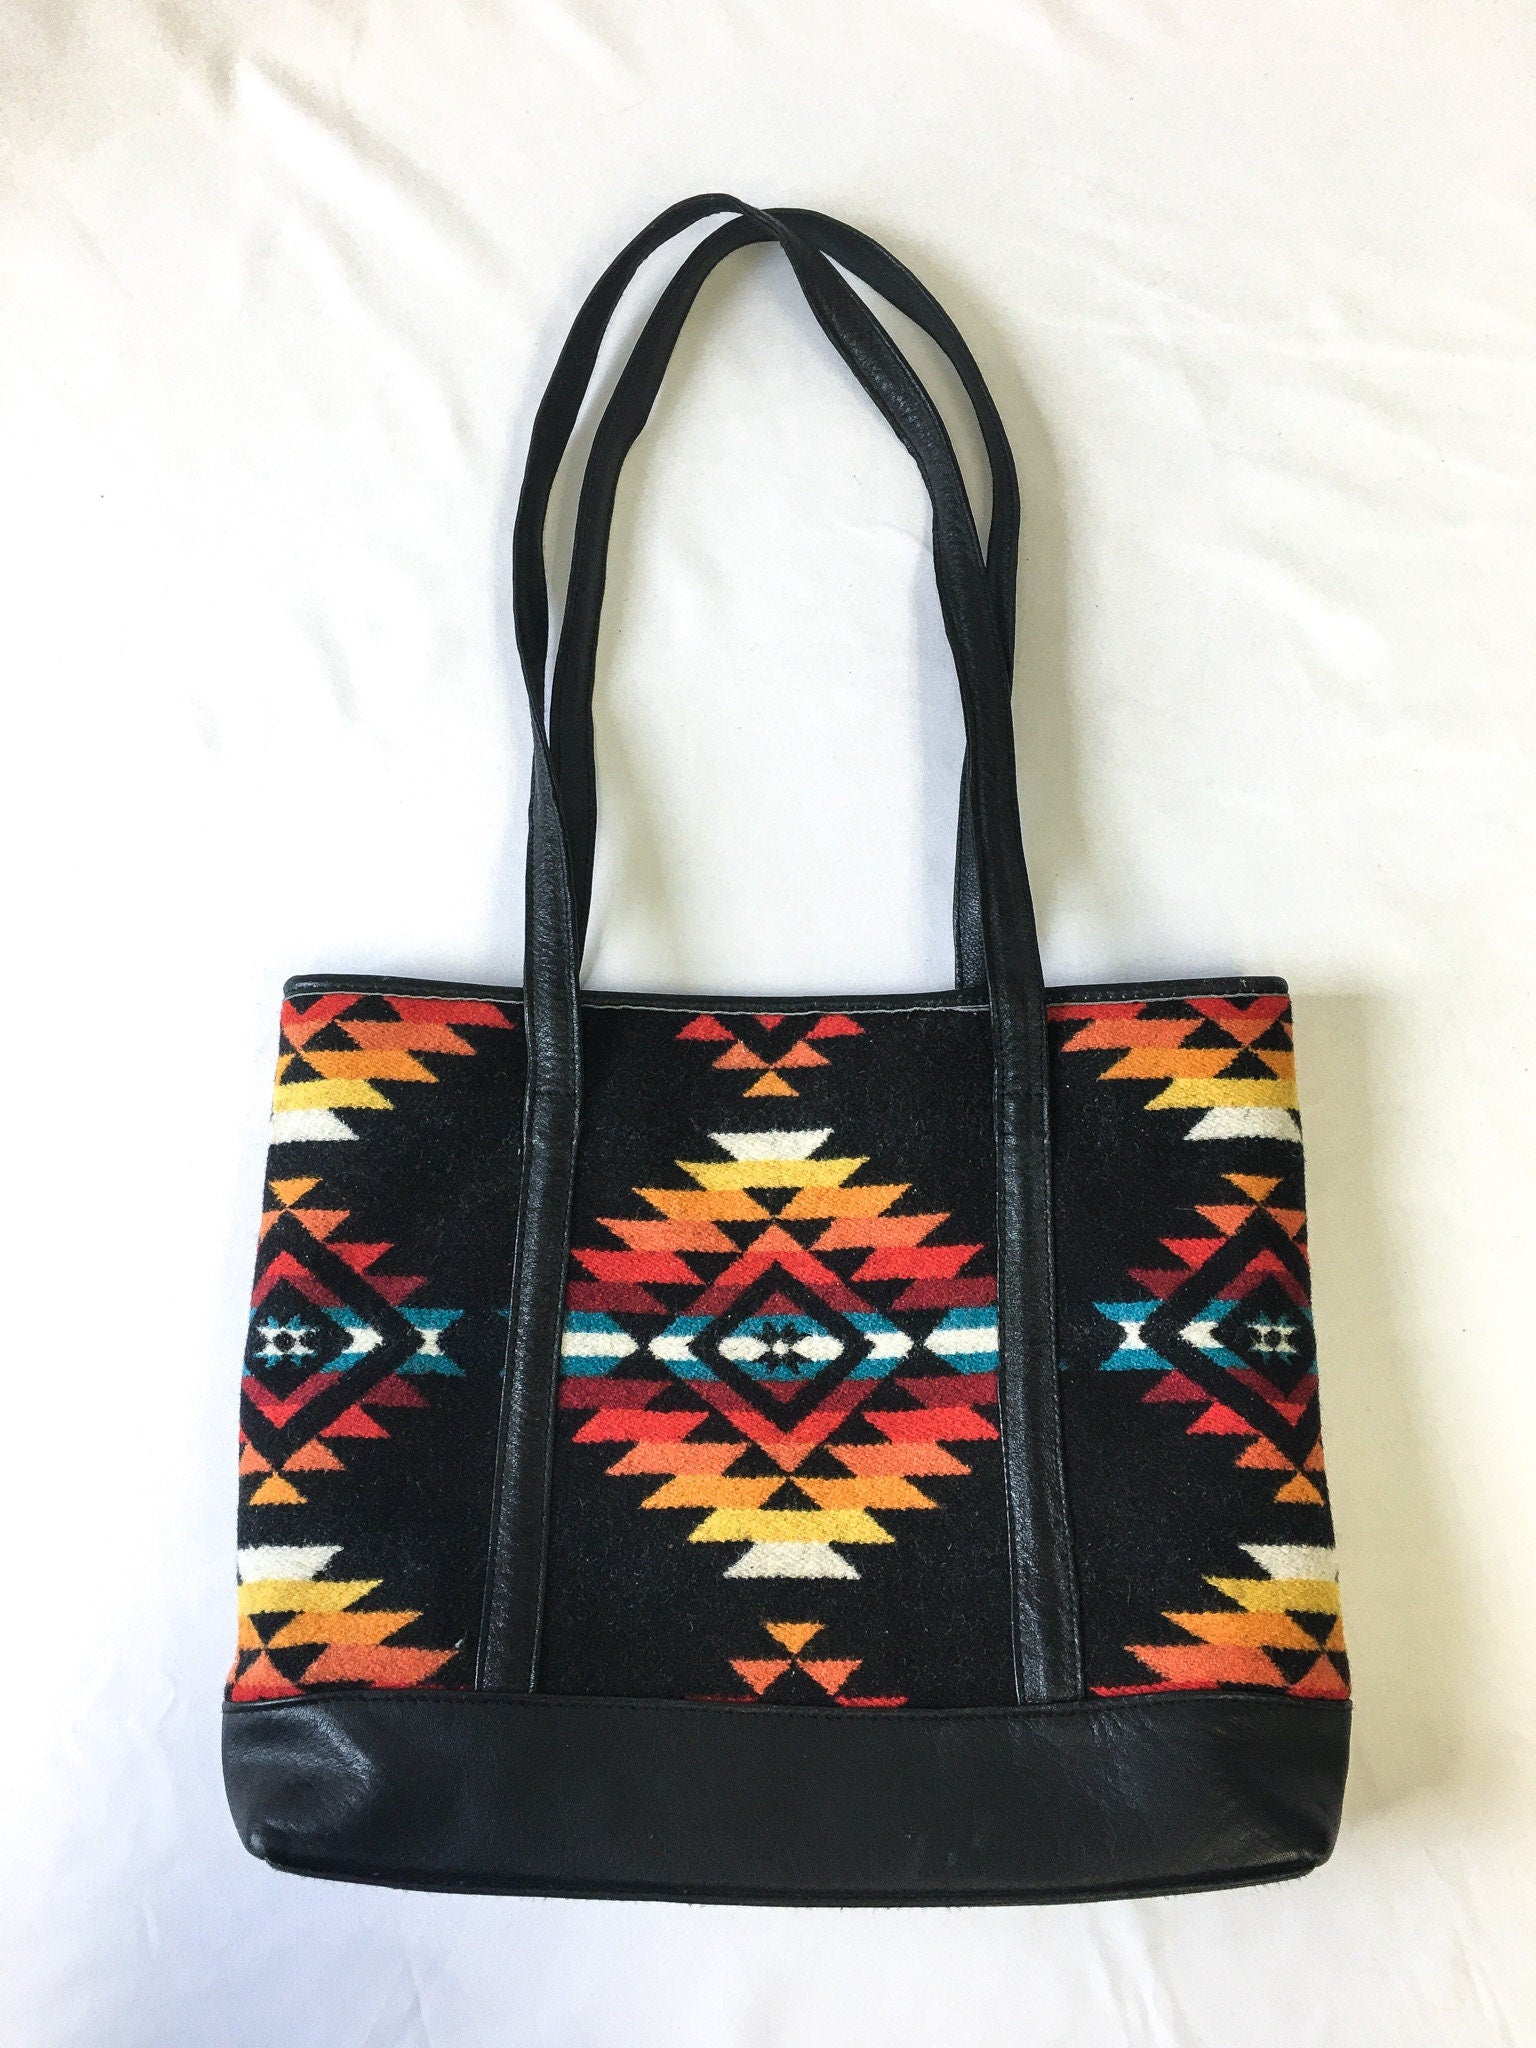 Tilonia@ Leather Tote Bag with Black & White Tribal Fabric - Tilonia®